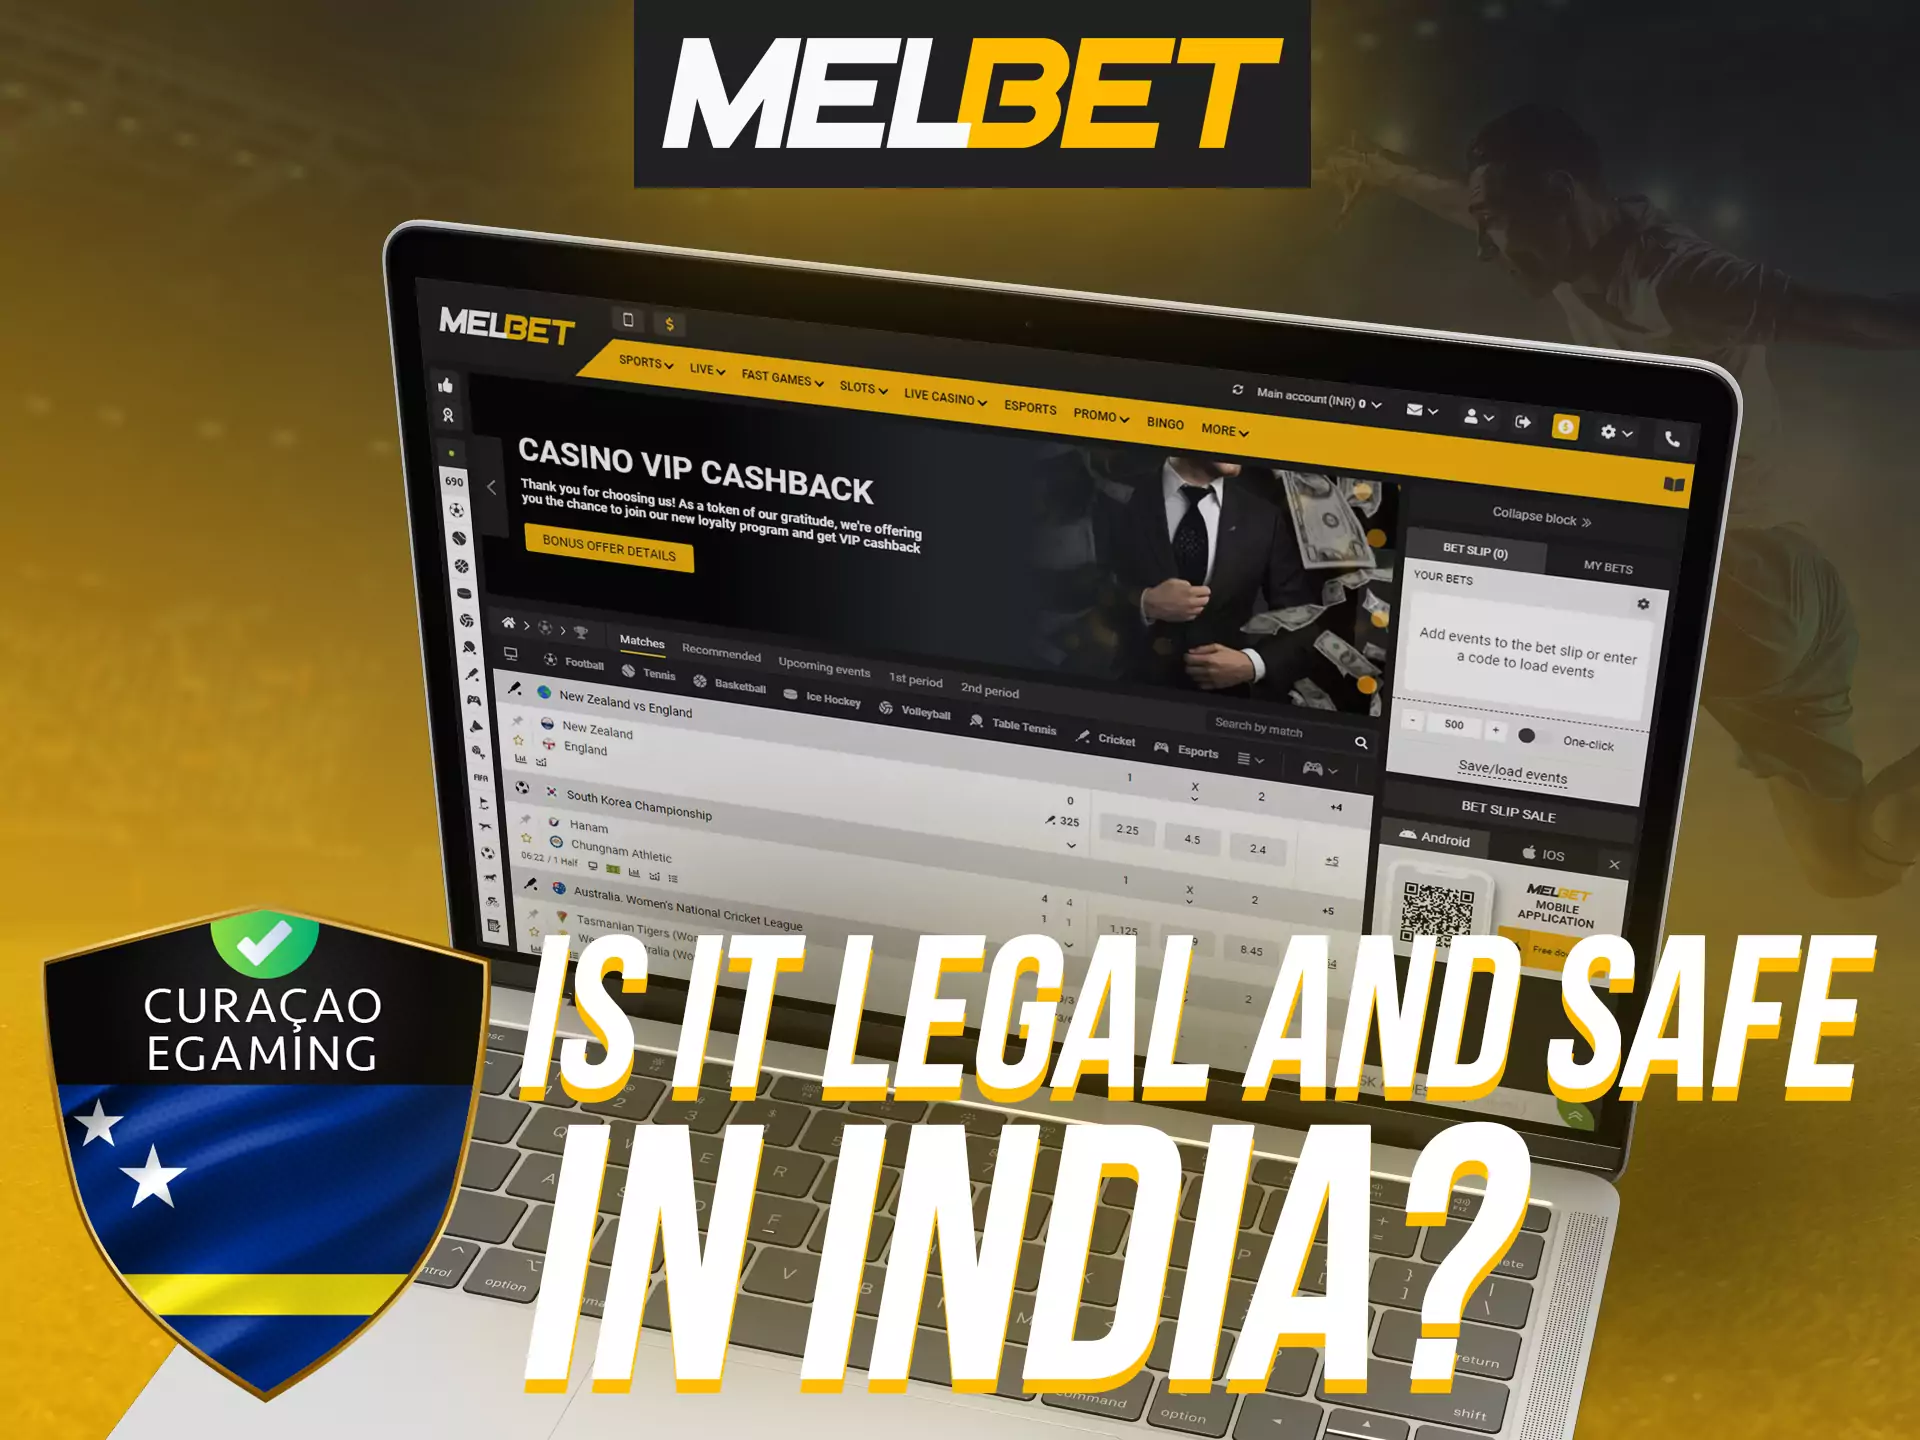 Melbet betting company is legal in India.